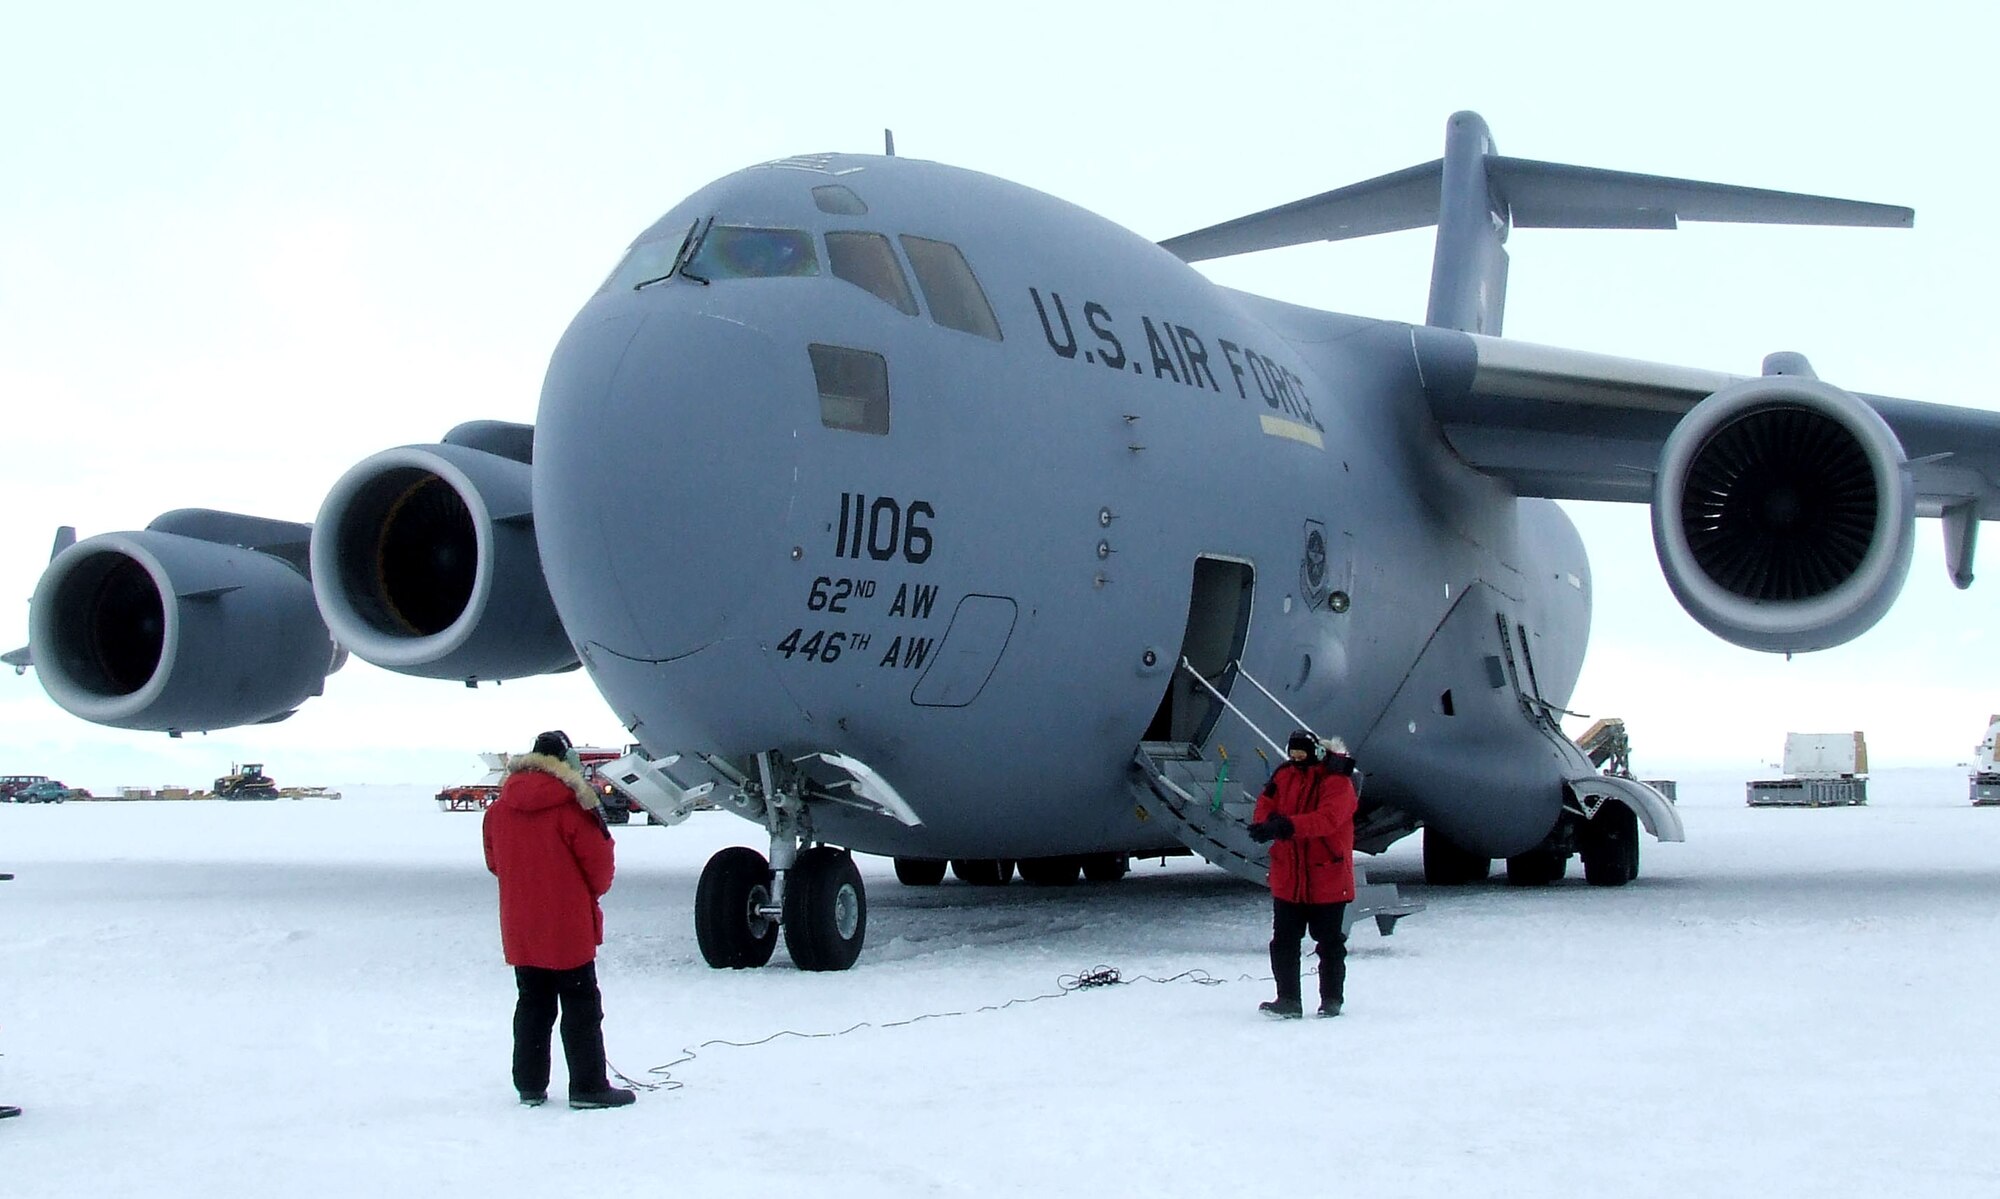 Senior Airman Kory Williams, left, and Senior Master Sgt. David Stutts assess the C-17 Globemaster III's condition after landing on the ice runway Nov. 16 at McMurdo Station, Antarctica. The jet, from McChord Air Force Base, Wash., shuttled supplies, equipment and personnel for Operation Deep Freeze. Airman Williams is from the 8th Airlift Squadron and Sergeant Stutts is from the 313th AS. (U.S. Air Force photo/1st Lt. Erika Yepsen)